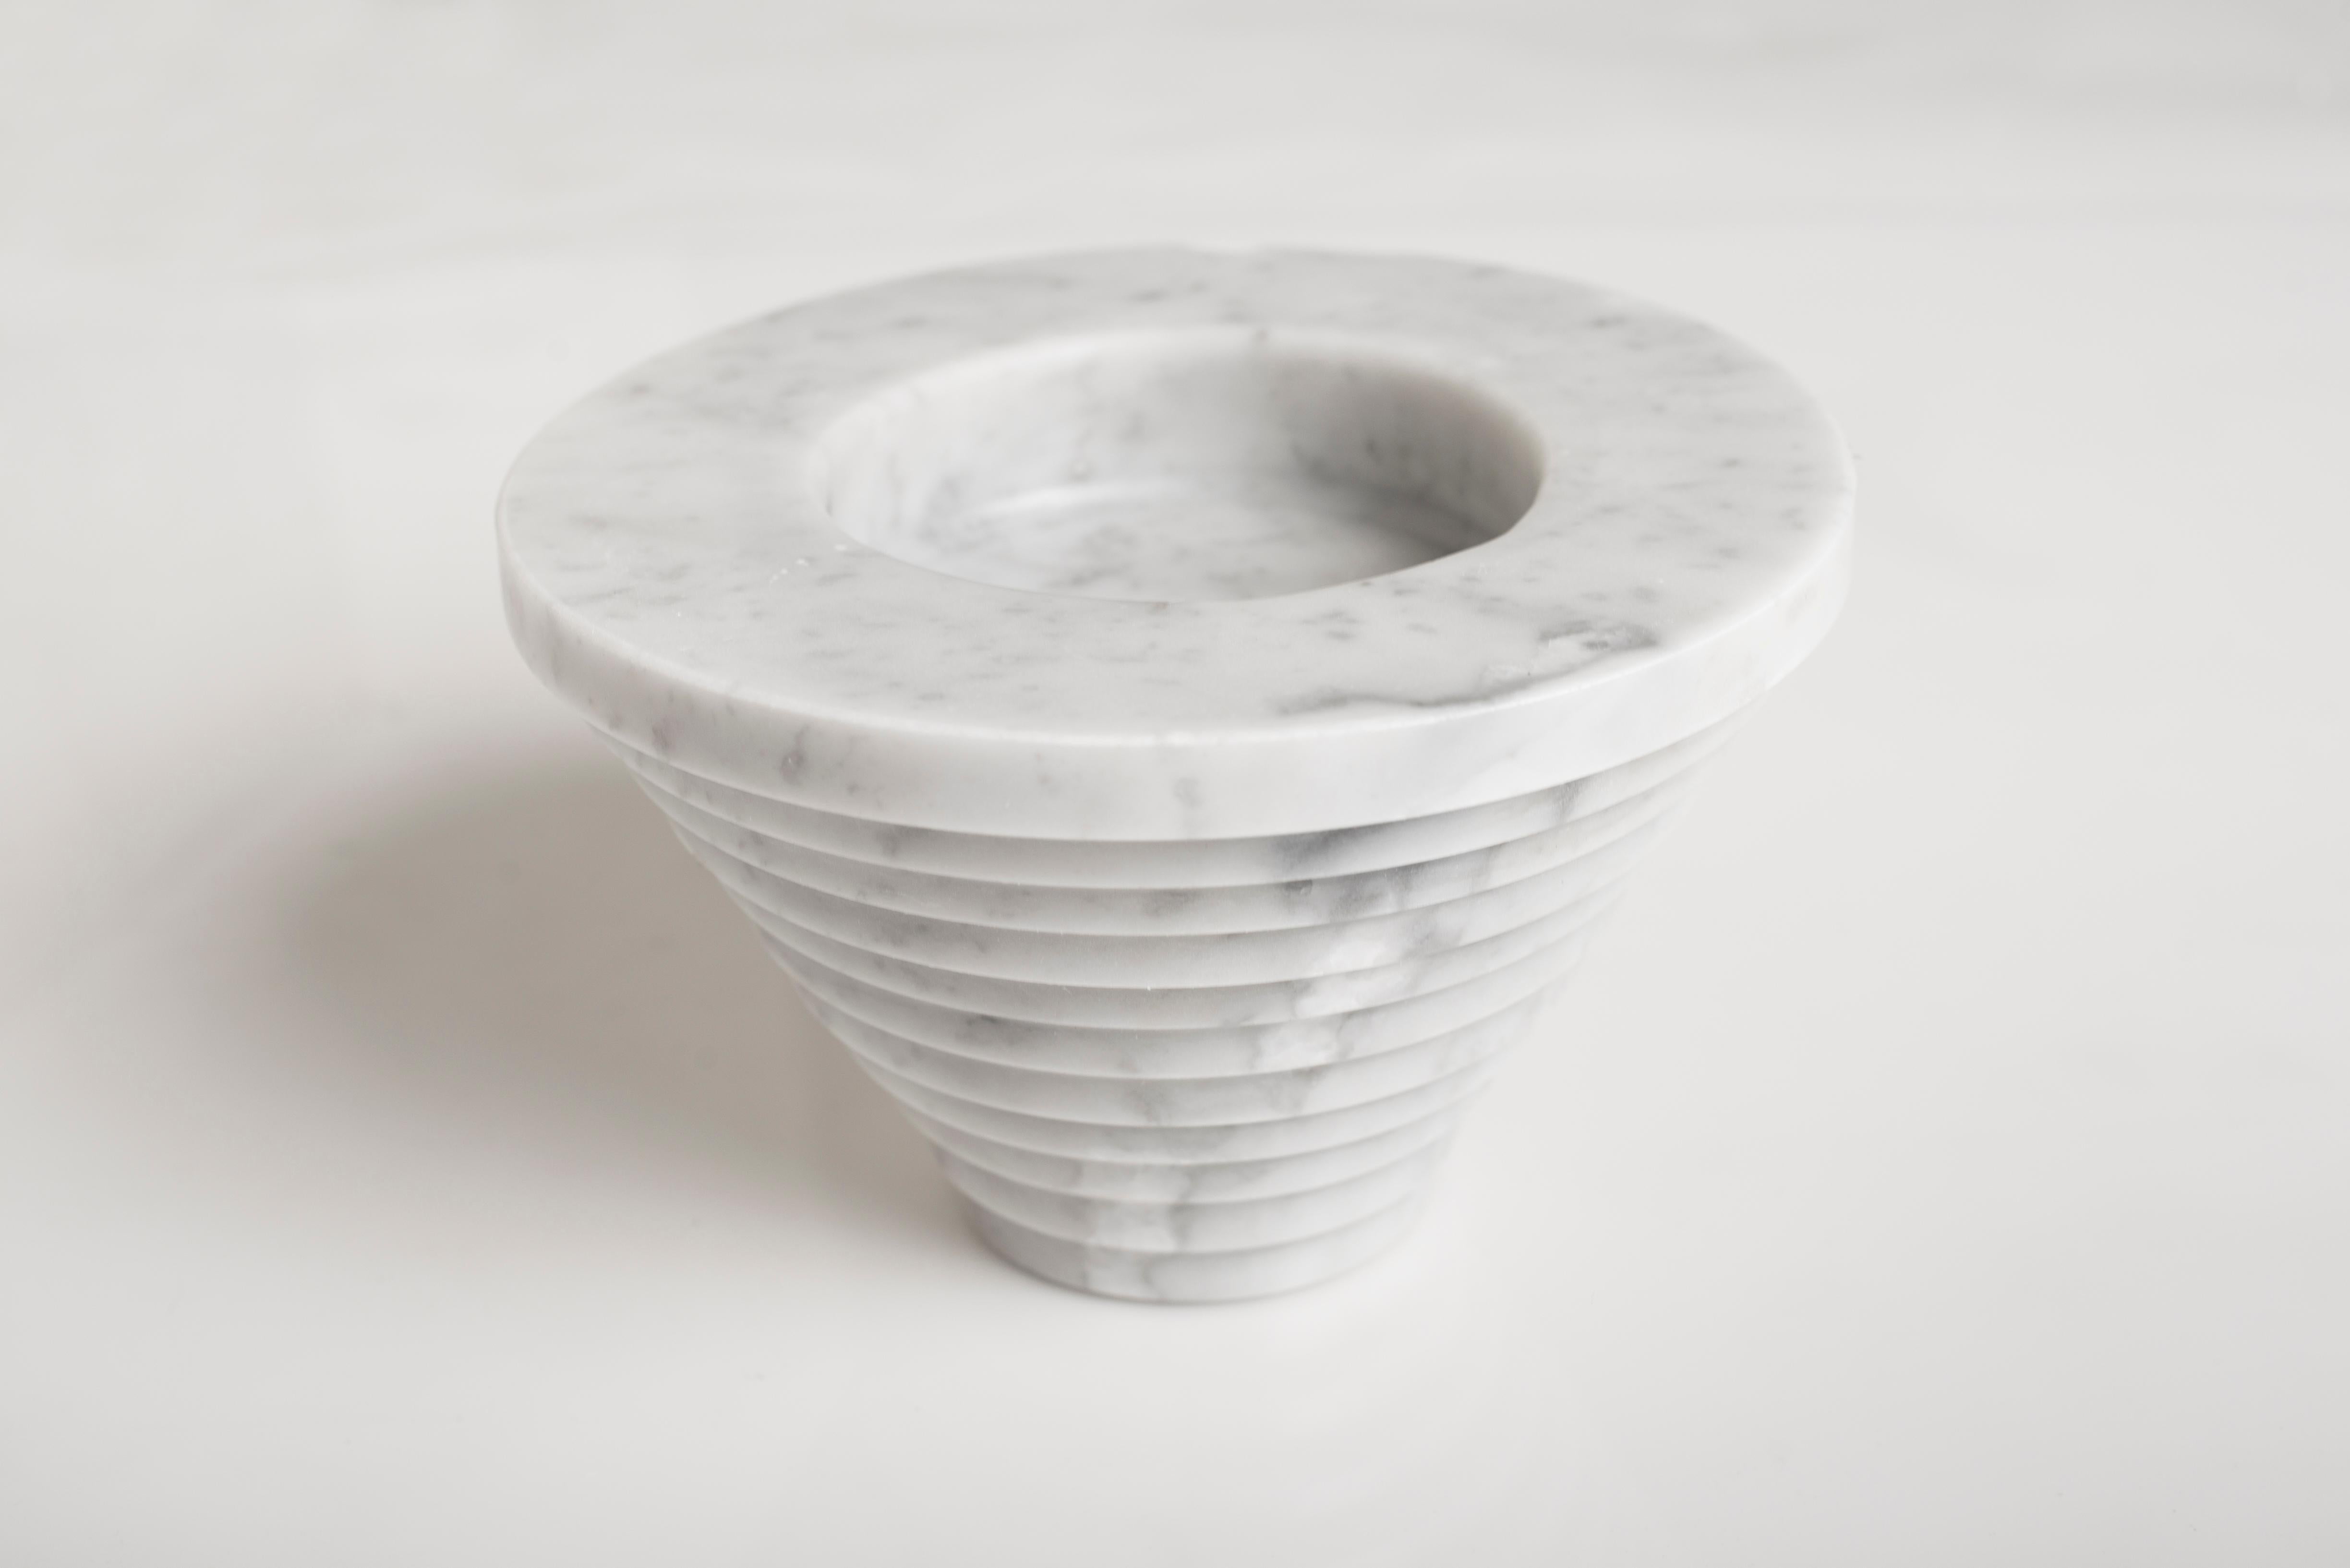 Sharjah sculpture by Carlo Massoud
Handmade 
Dimensions: D 15 x H 13.5 cm 
Materials: Carrara Marble

Carlo Massoud’s work stems from his relentless questioning of social, political, cultural, and environmental norms. He often pushes his